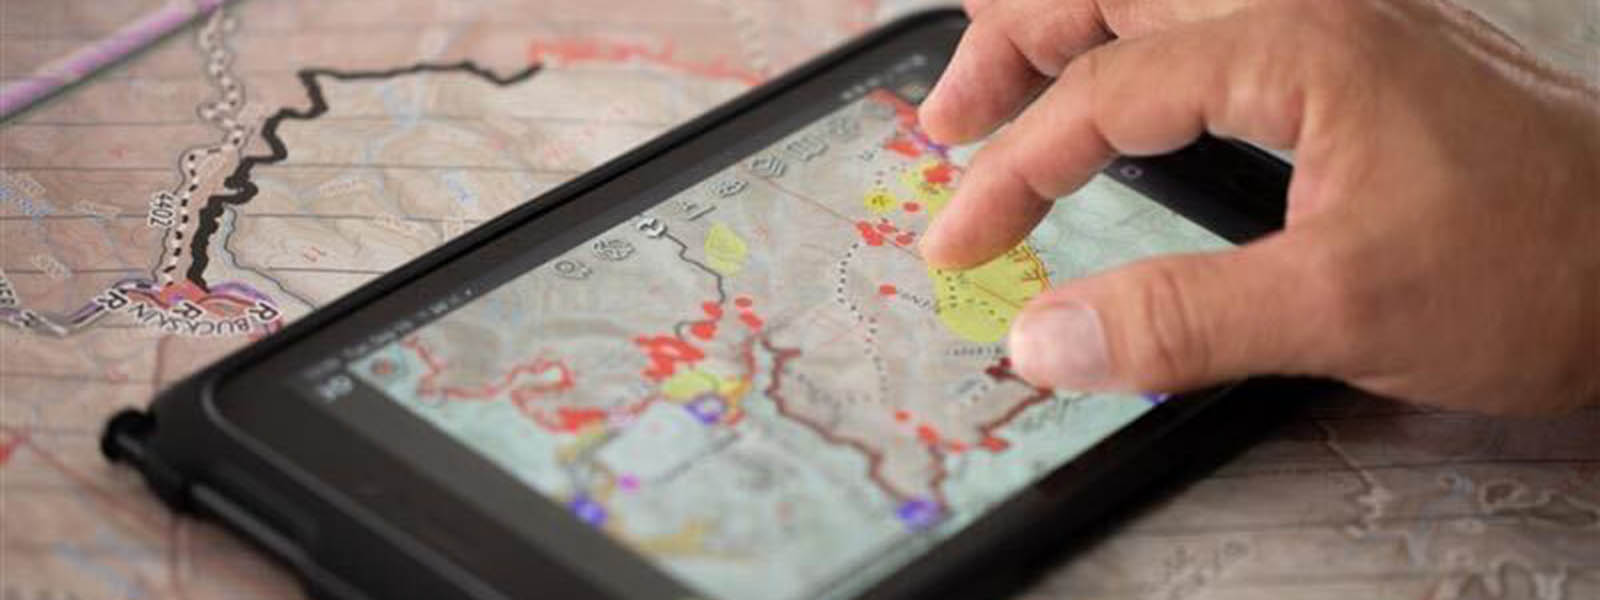 WFTAK being used on a tablet to look at a map.